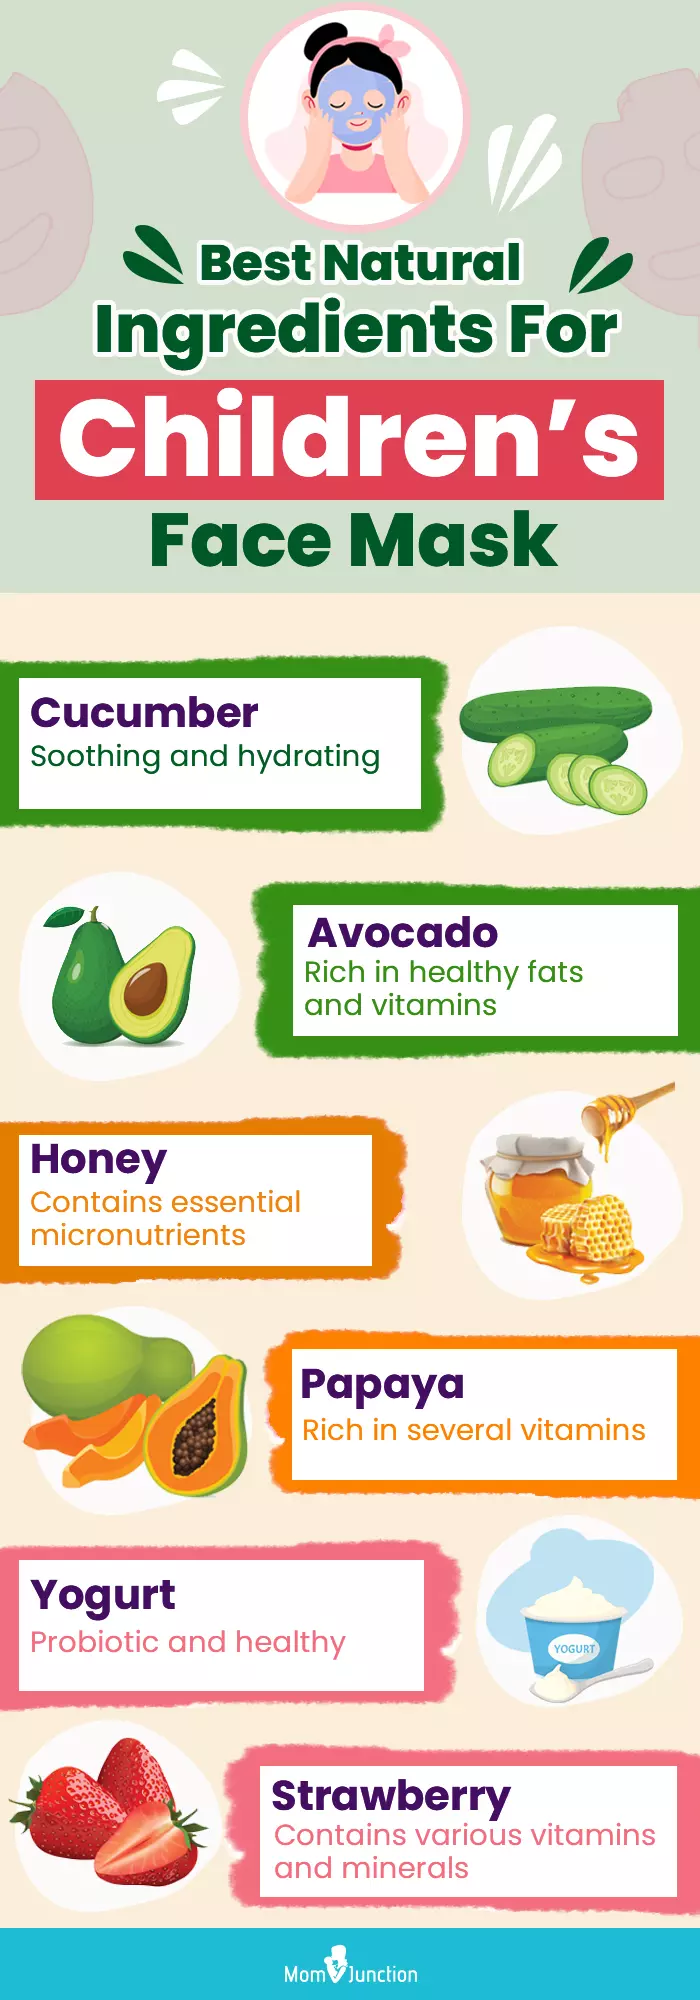 best natural ingredients for children s face mask (infographic)